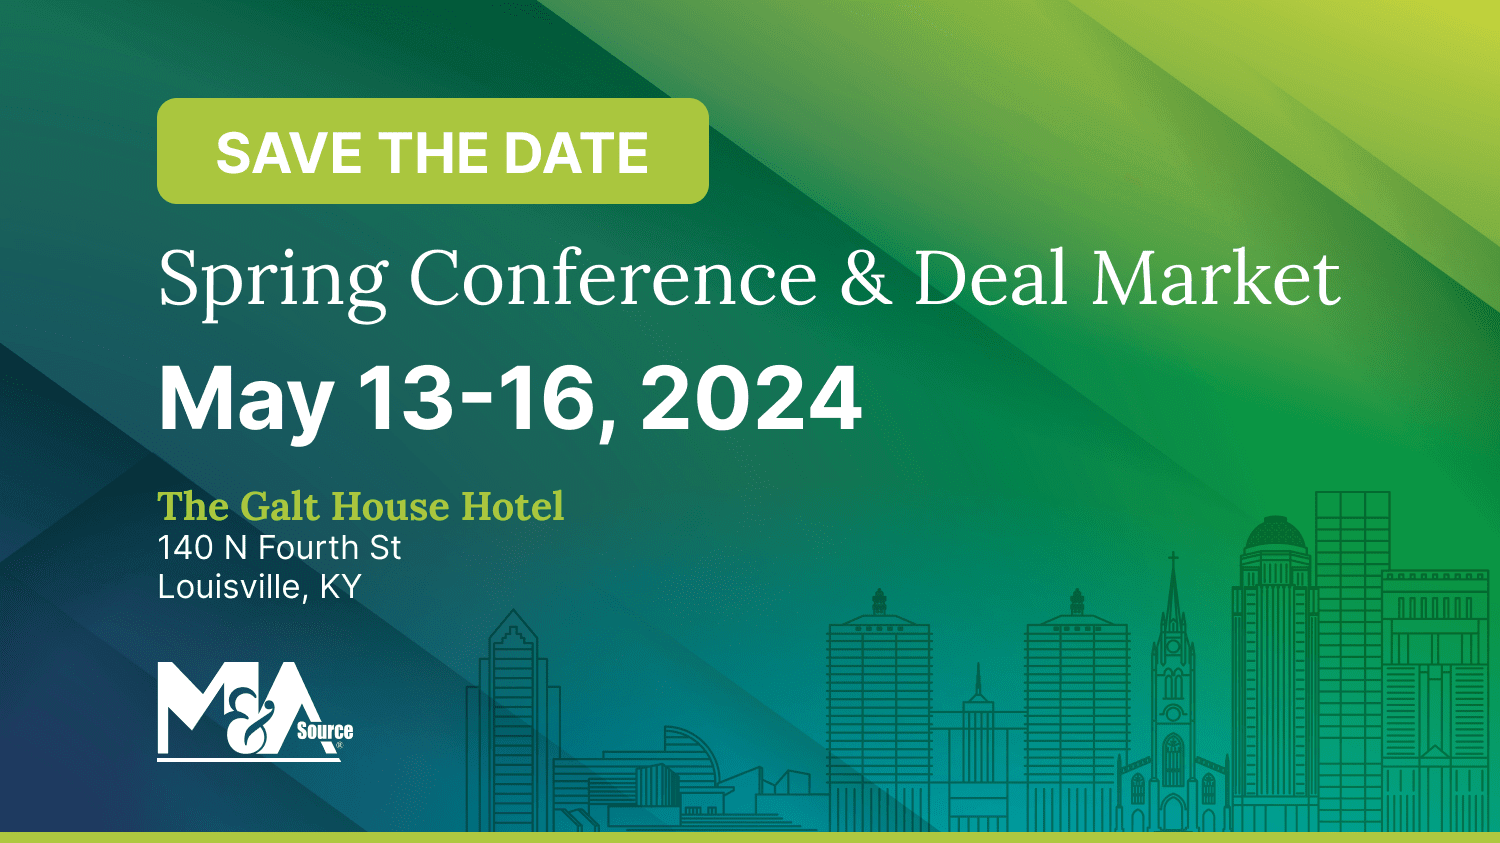 M&A Source 2024 Spring Conference & Deal Market Save the Date